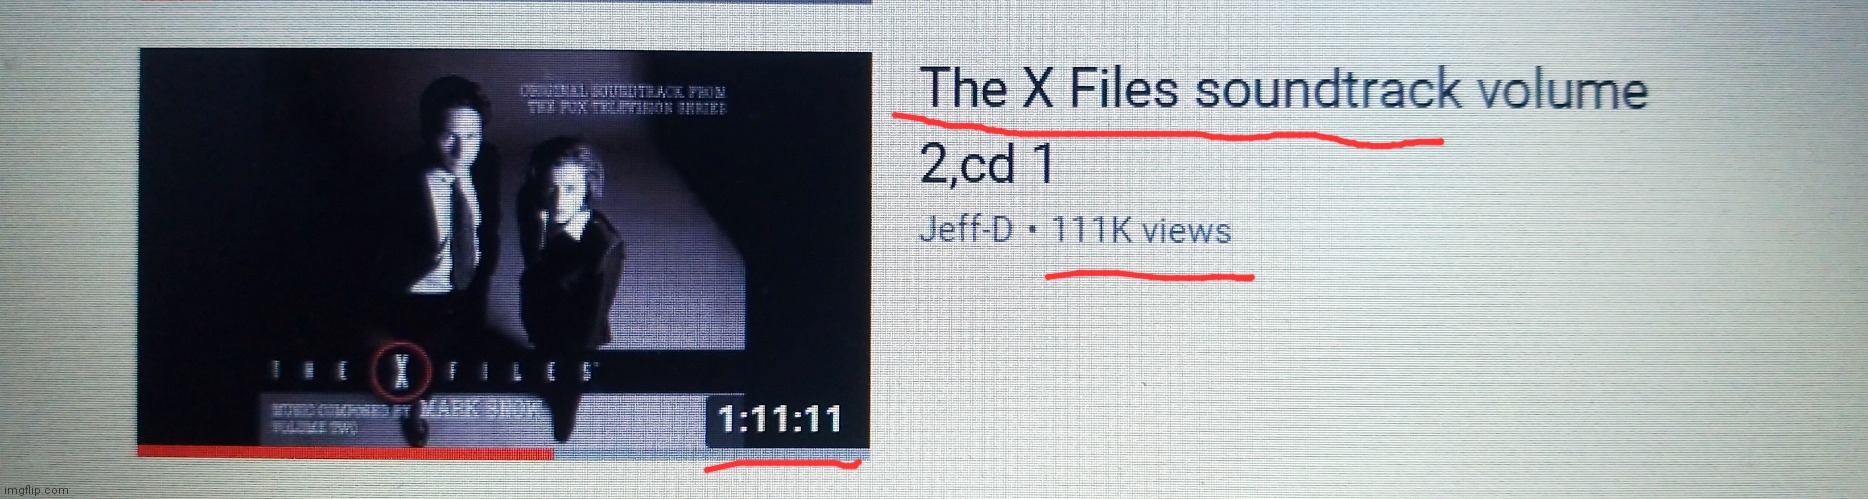 1 hour, 11 minutes, 11 seconds with 111k views on the X Files theme. Hmm... | image tagged in illuminati,coincidence i think not | made w/ Imgflip meme maker